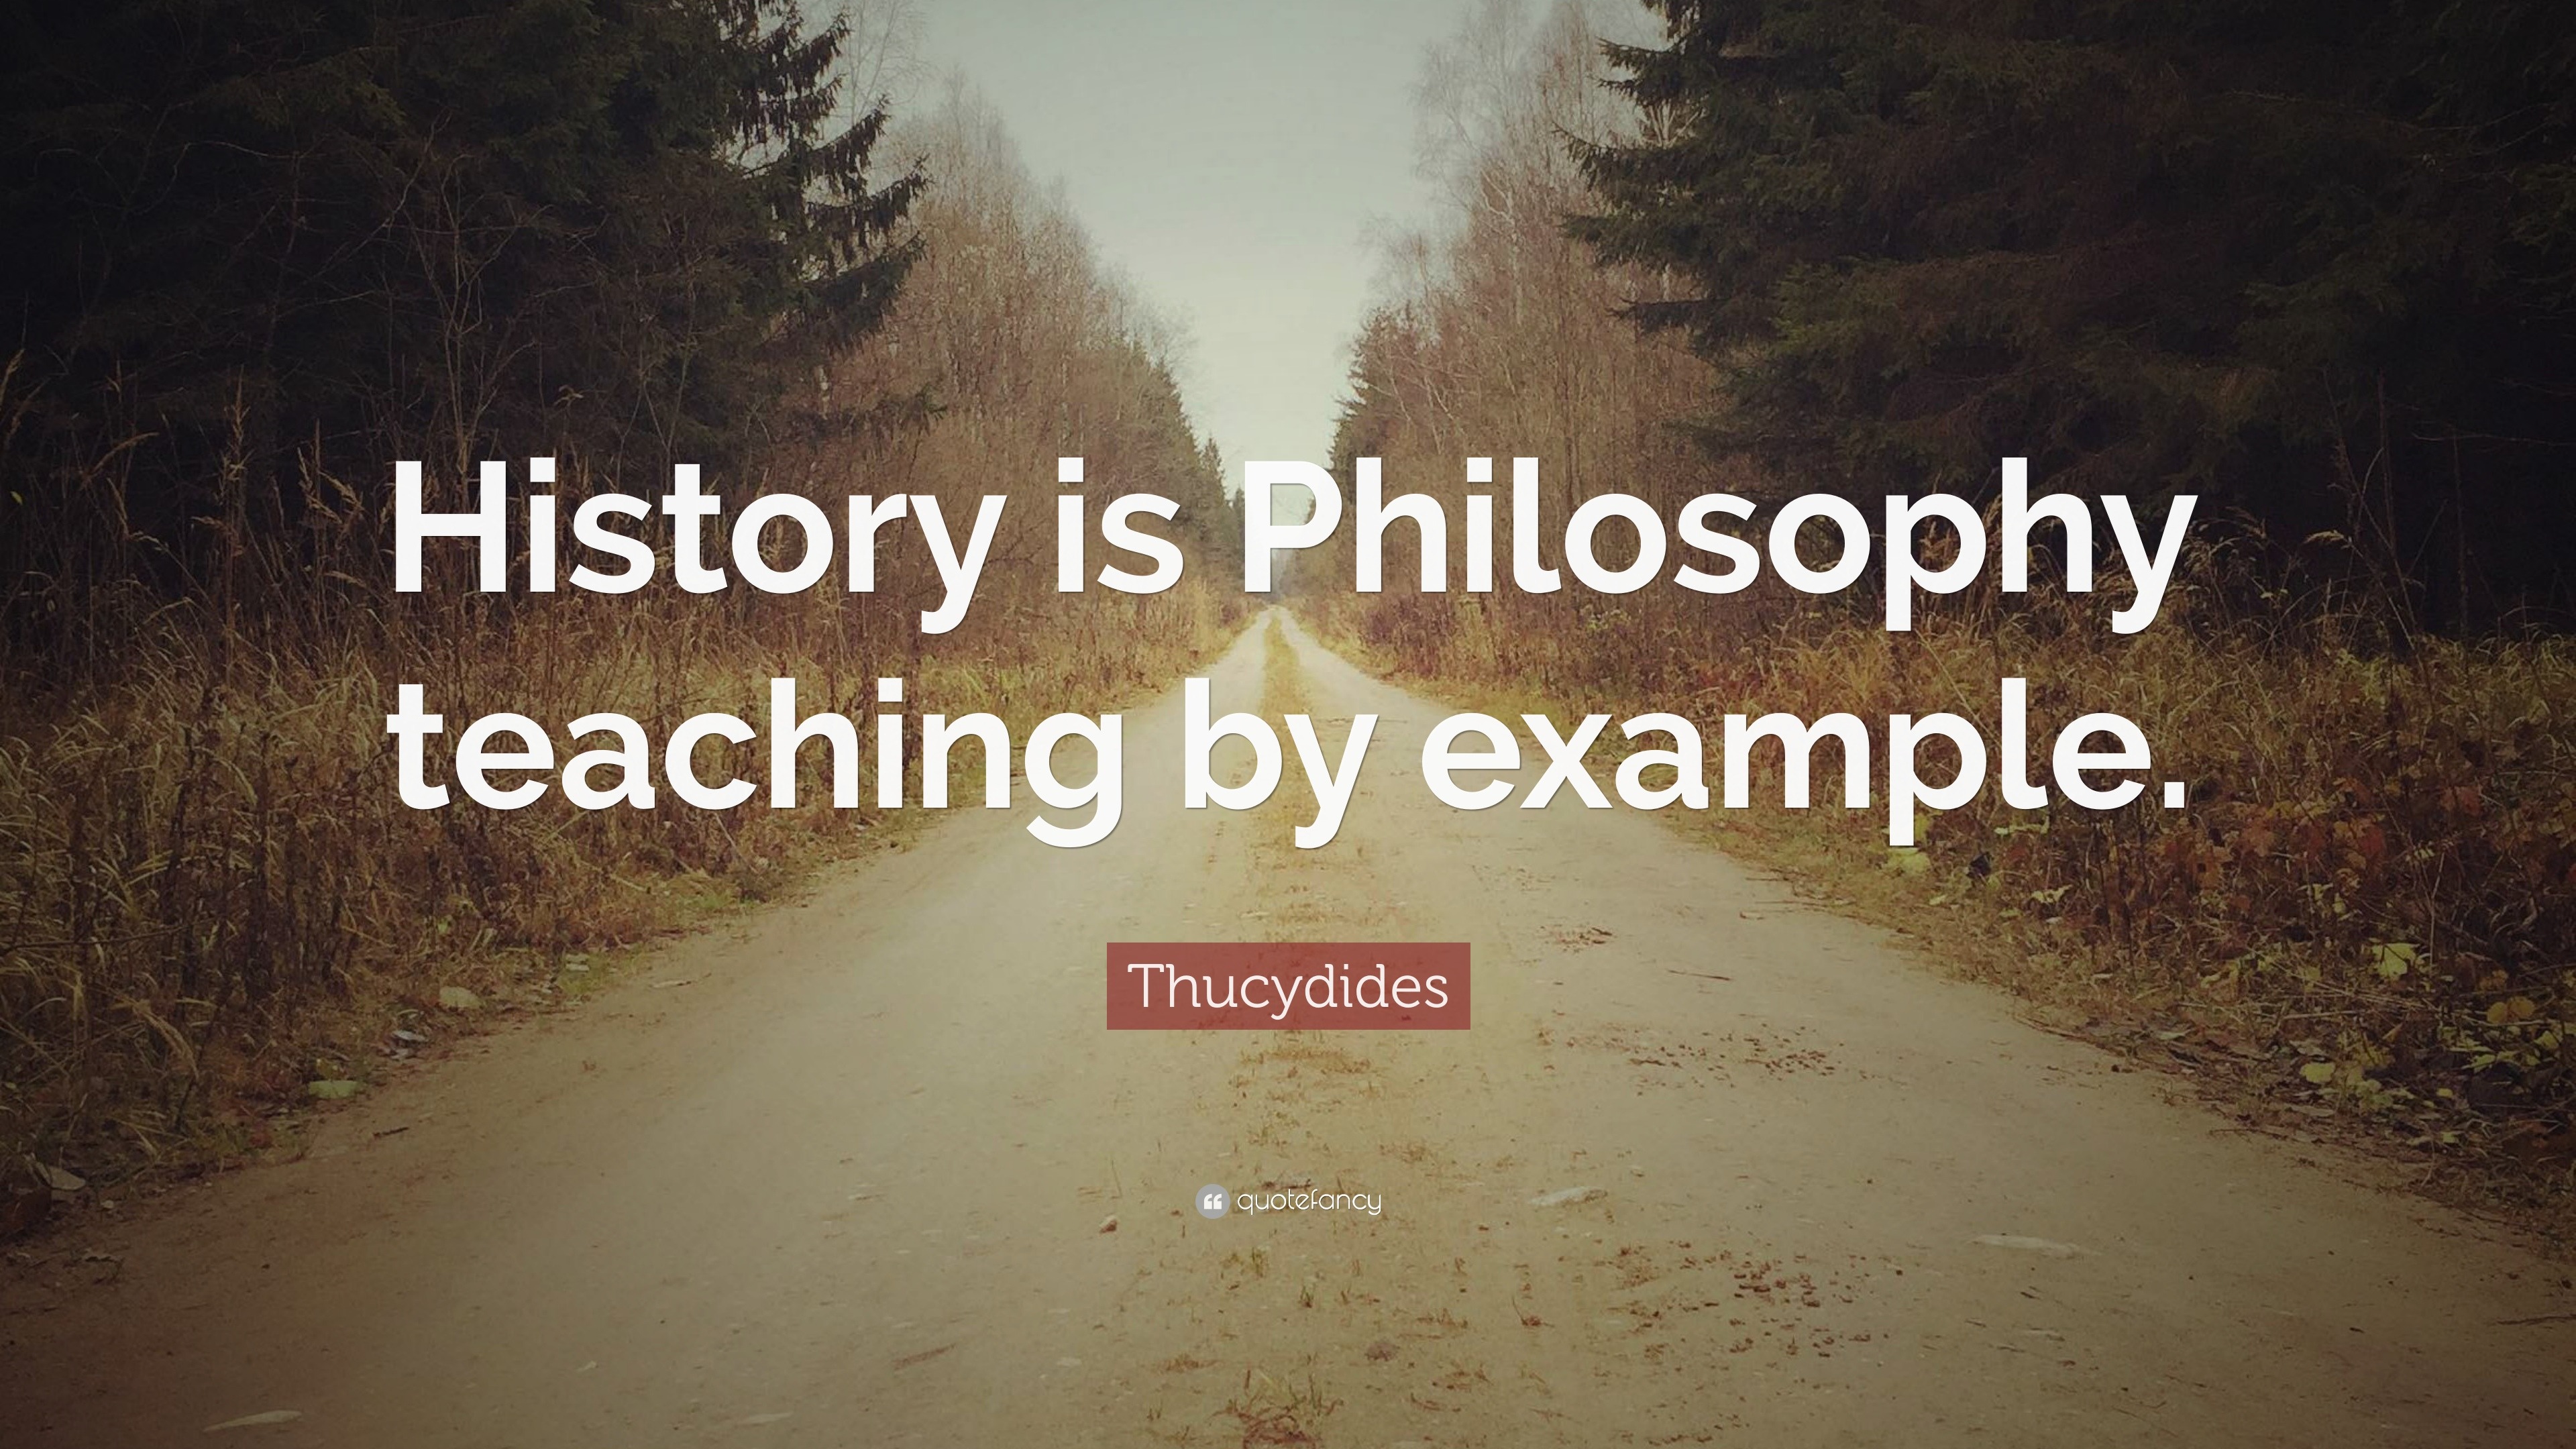 Thucydides Quote: “History is Philosophy teaching by example.”